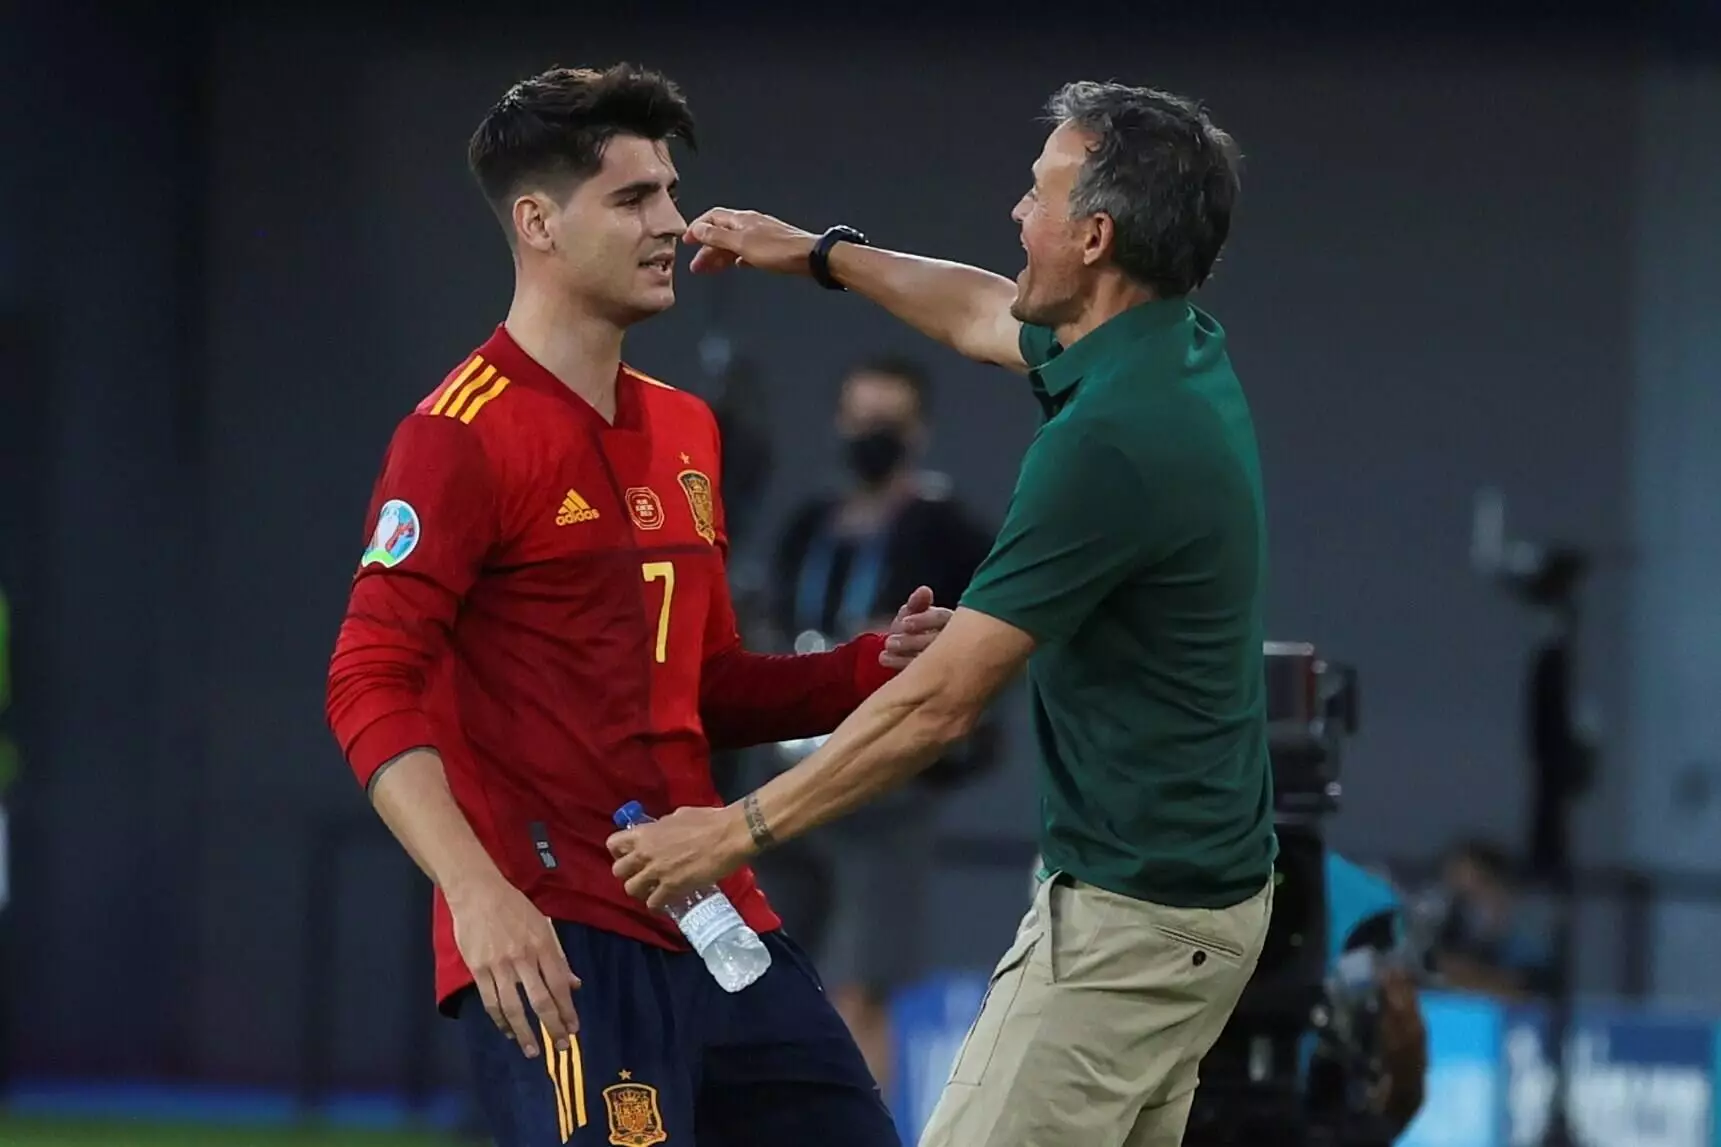 Alvaro Morata has received death threats over his current form for Spain